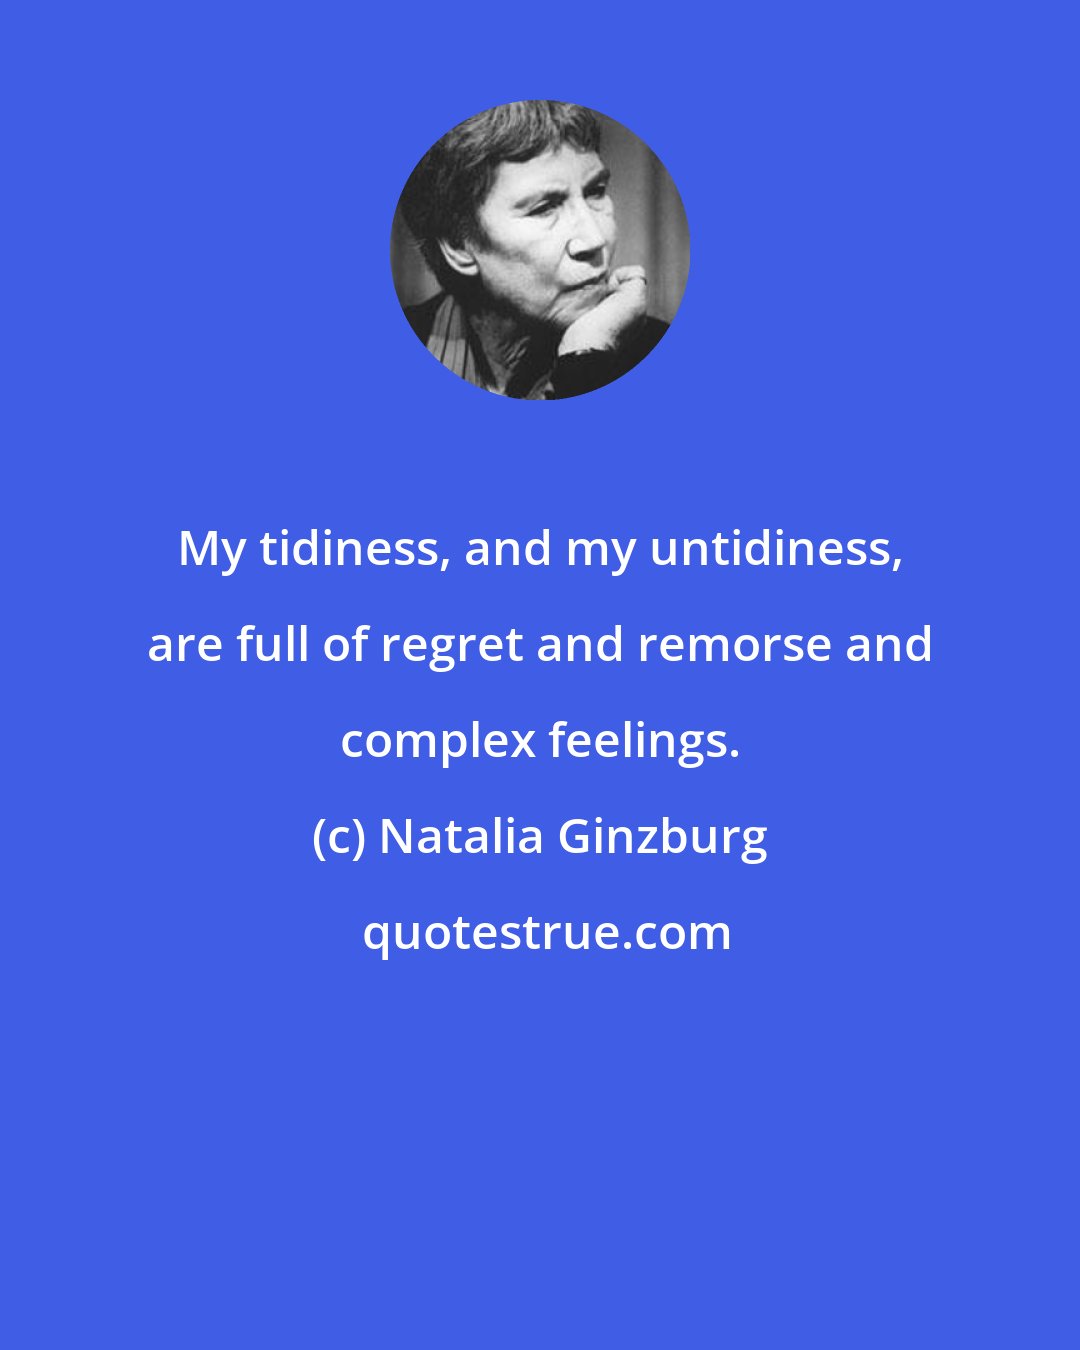 Natalia Ginzburg: My tidiness, and my untidiness, are full of regret and remorse and complex feelings.